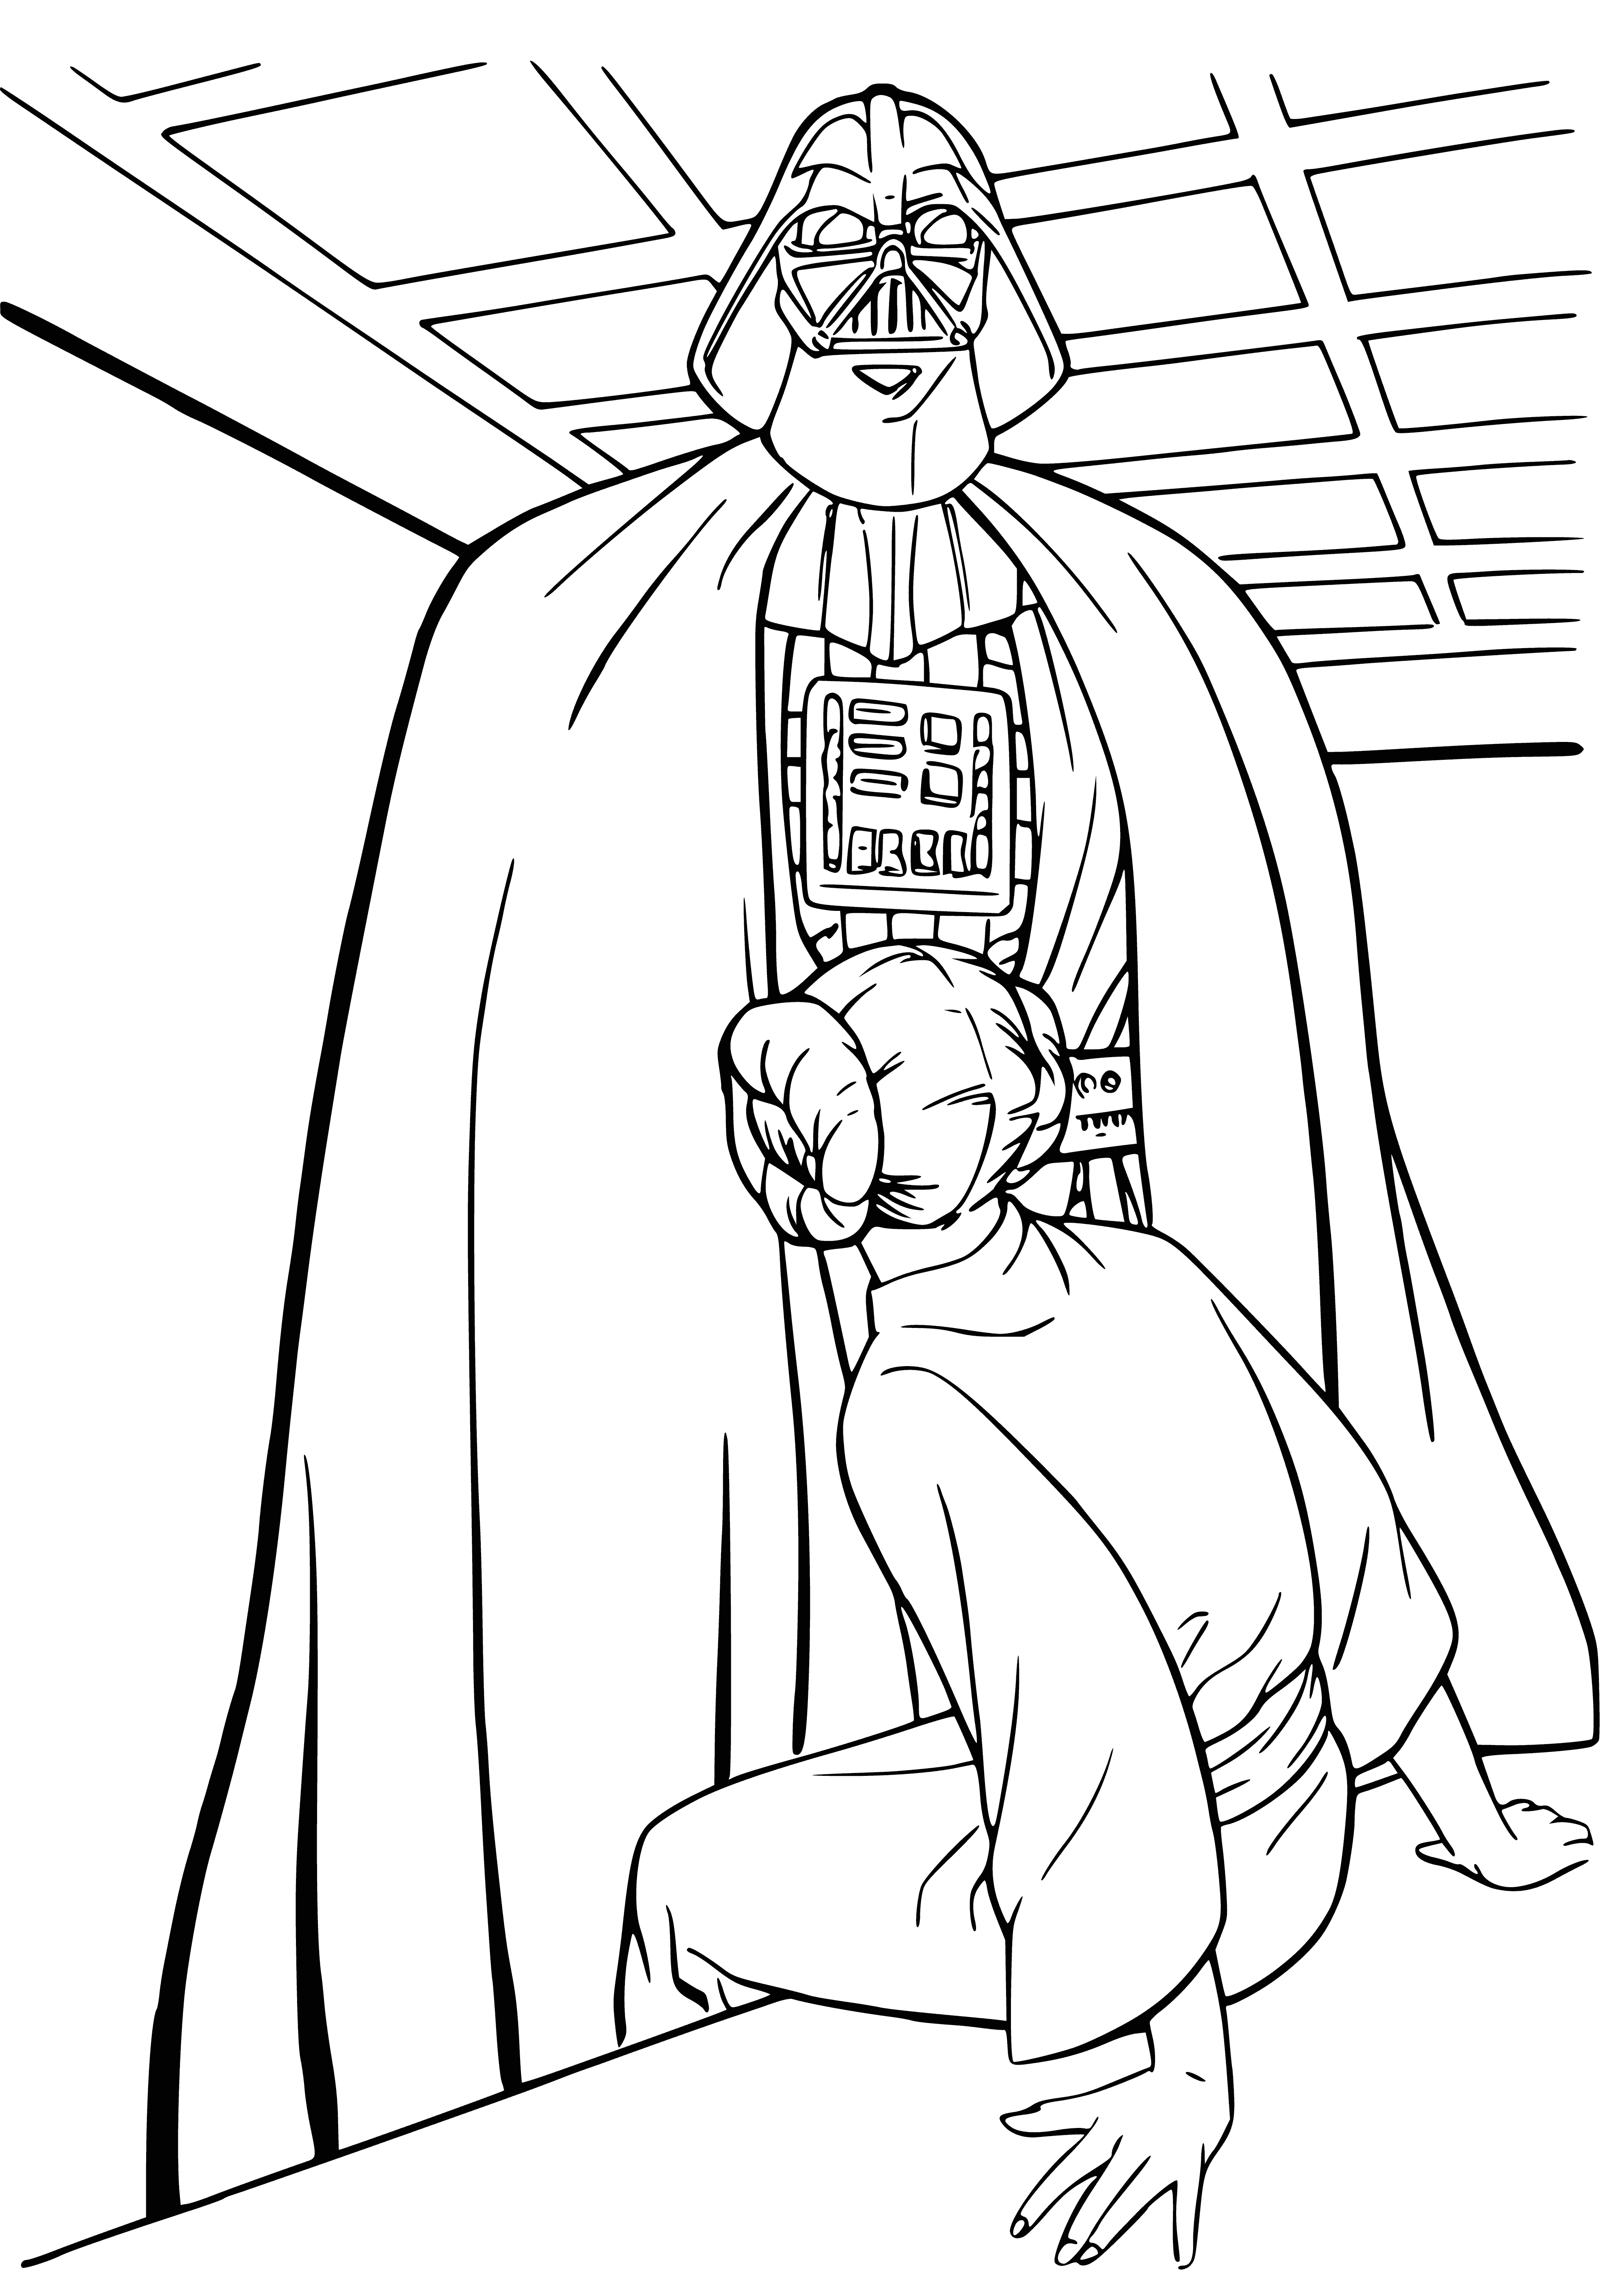 coloring page: Princess Leia stands defiantly before Darth Vader, tall, dark figure in all black with a helmeted face. From Star Wars movie.